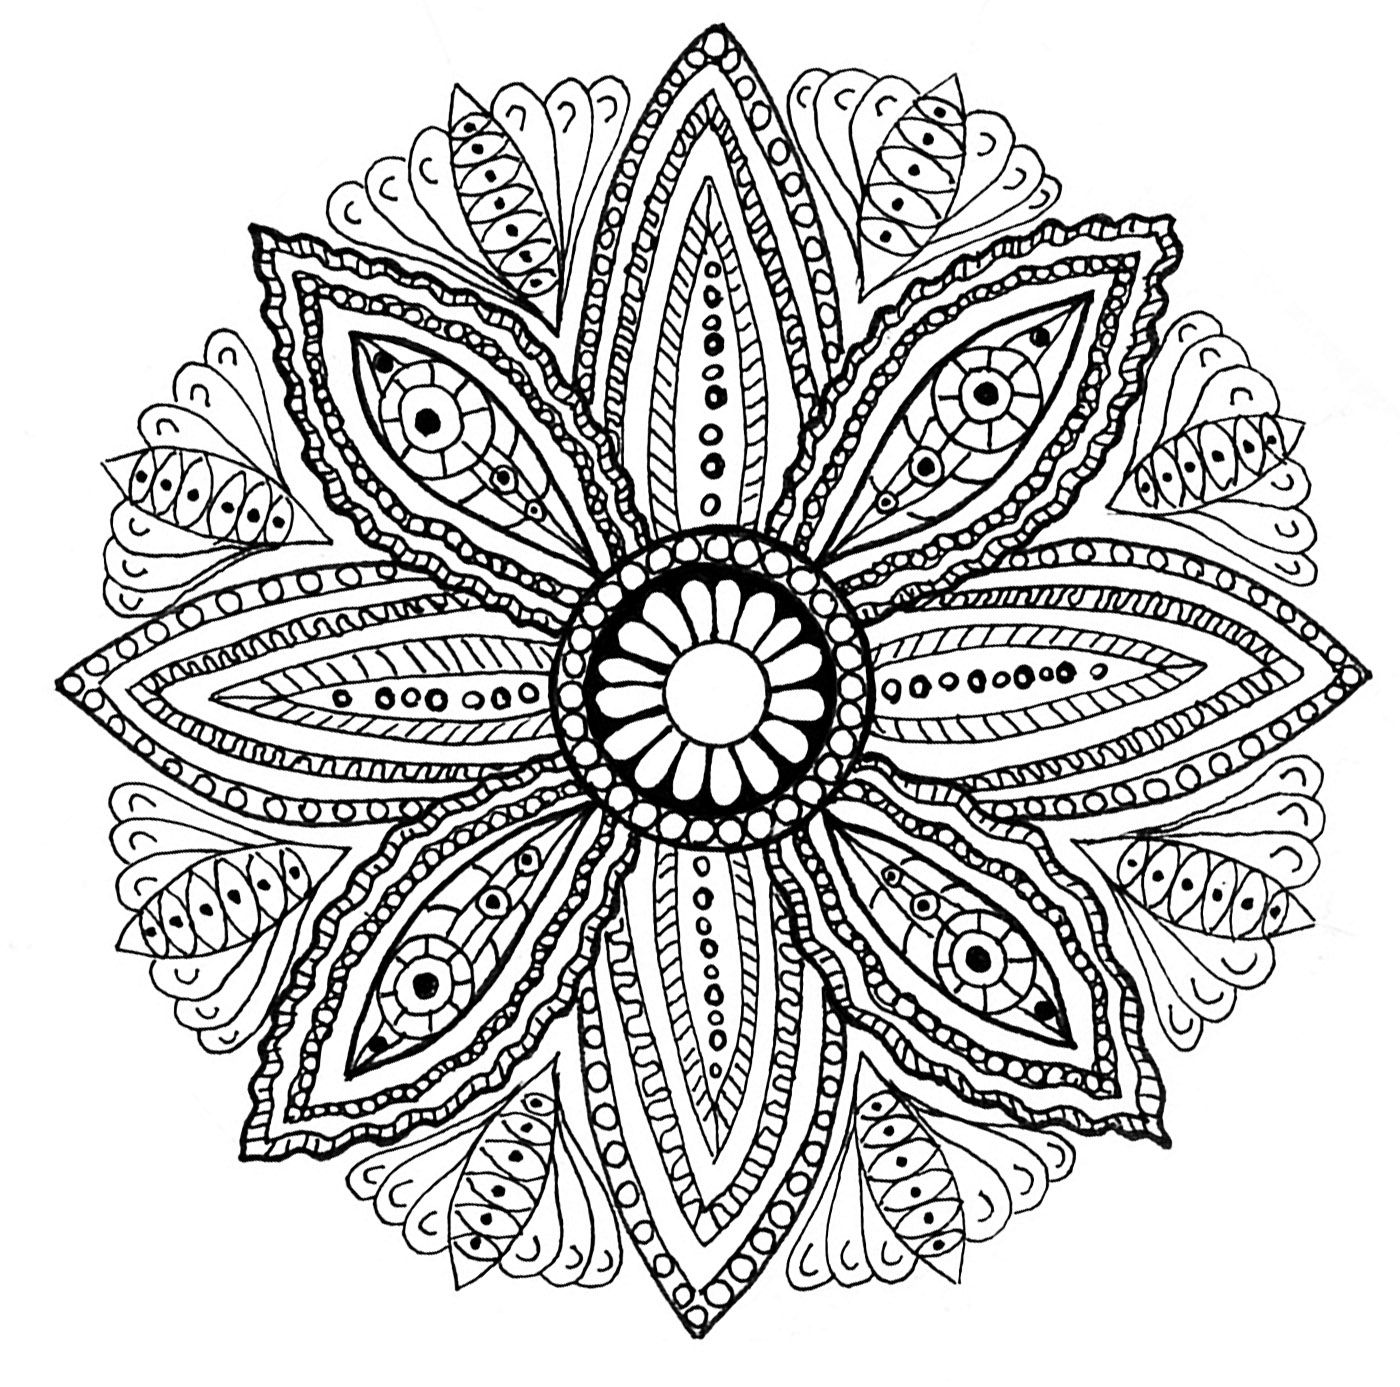 Drawing of a Mandala with leaves